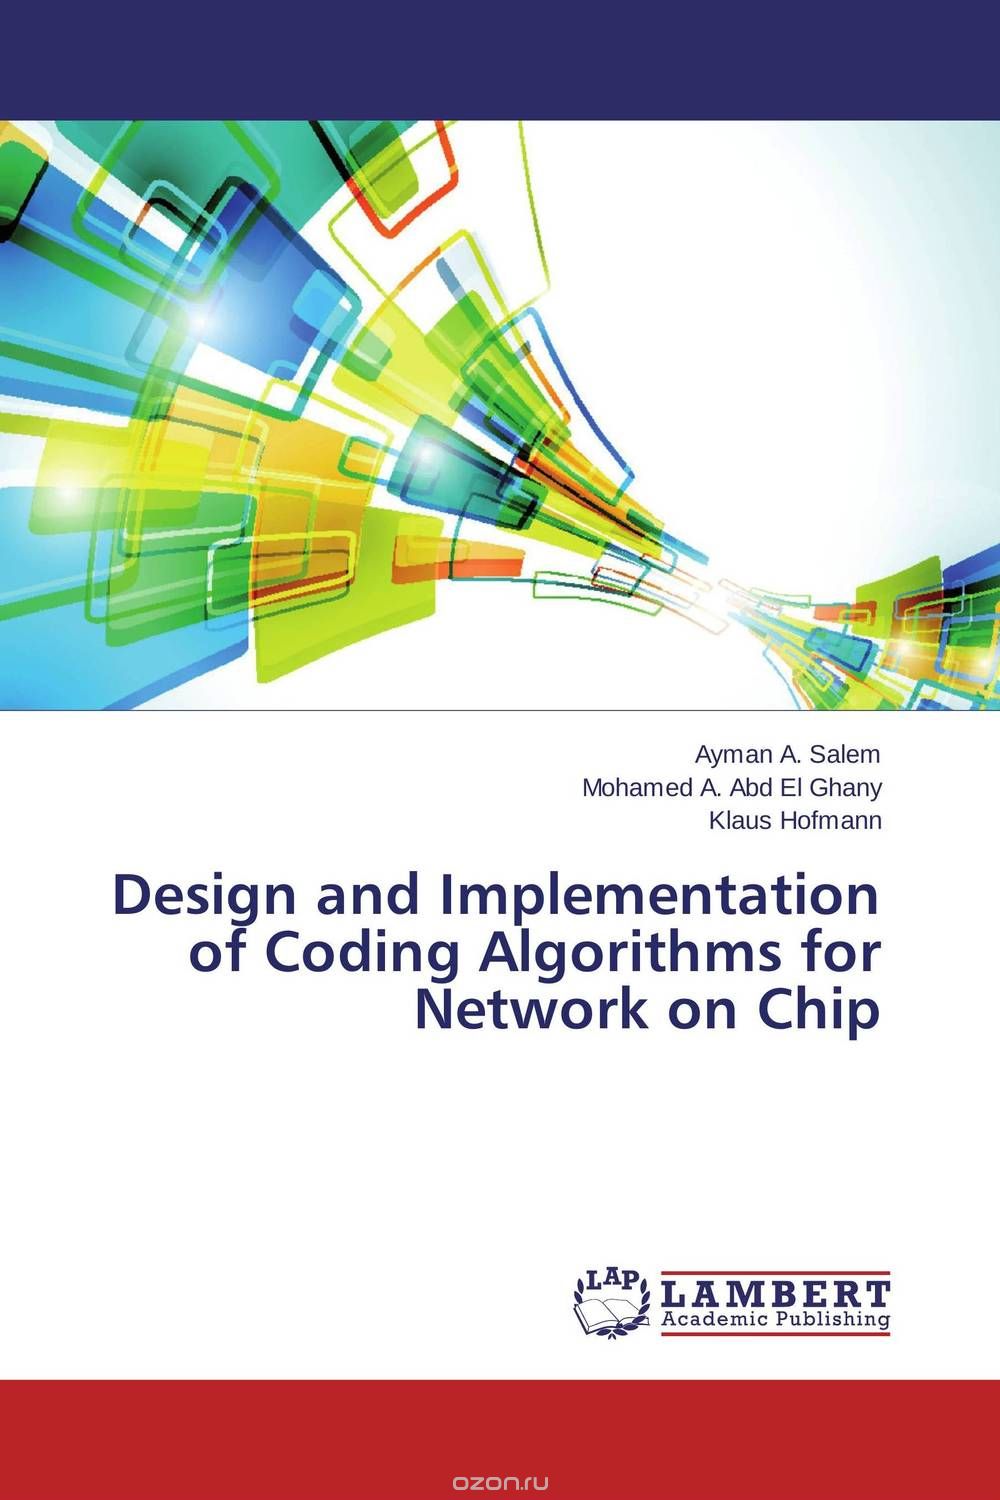 Design and Implementation of Coding Algorithms for Network on Chip